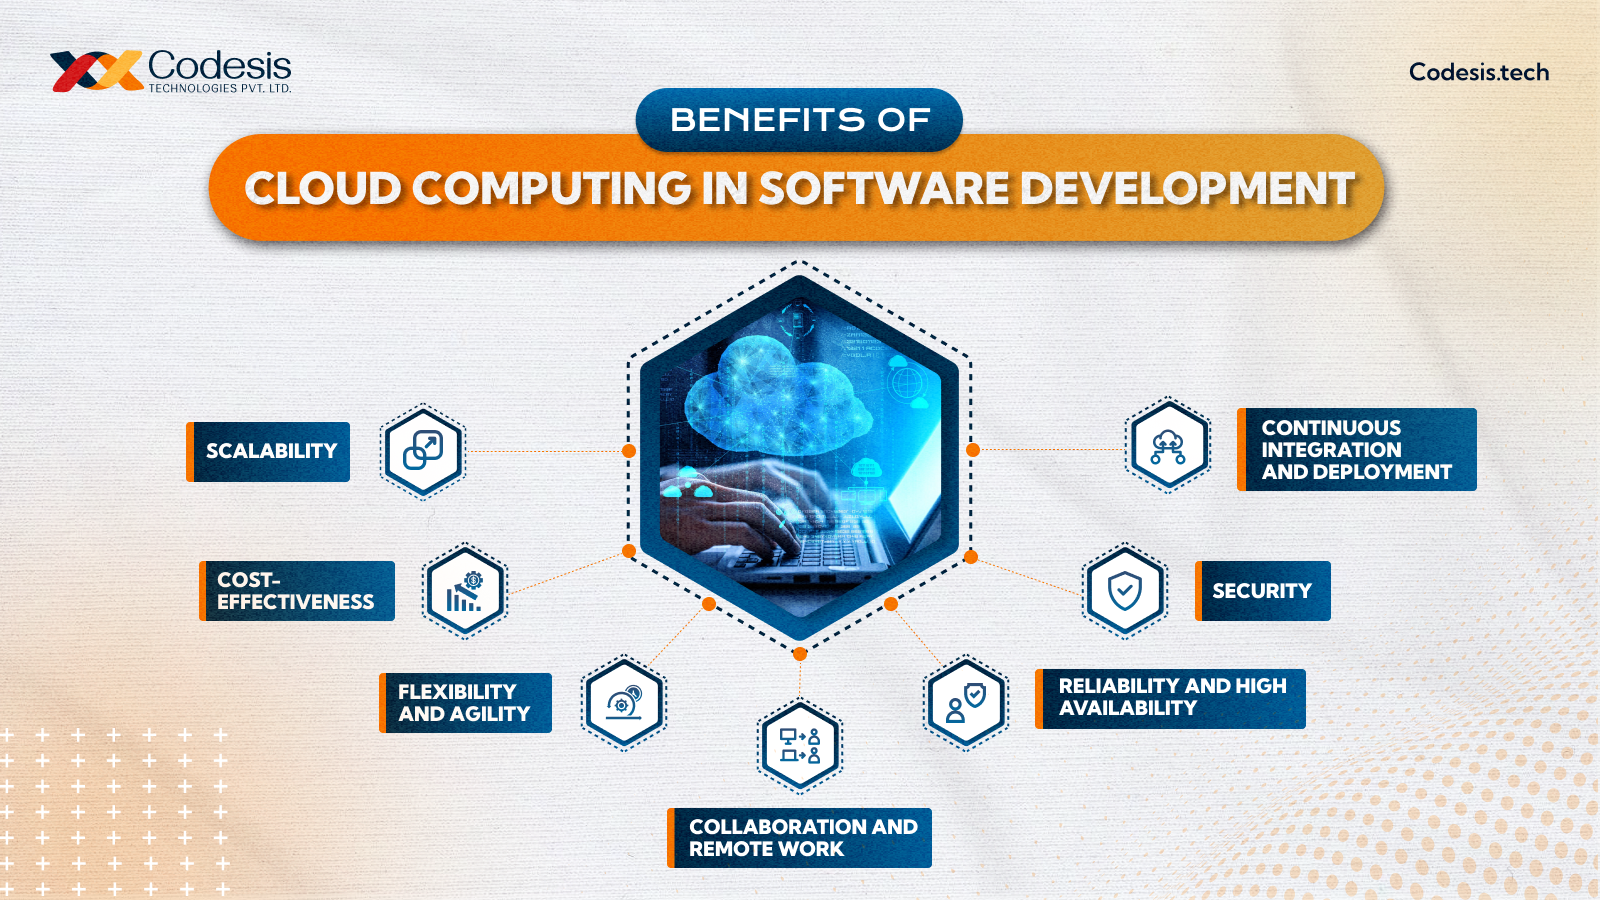 an image showing various benefits of cloud computing in software development with the image of person using an laptop in the middle